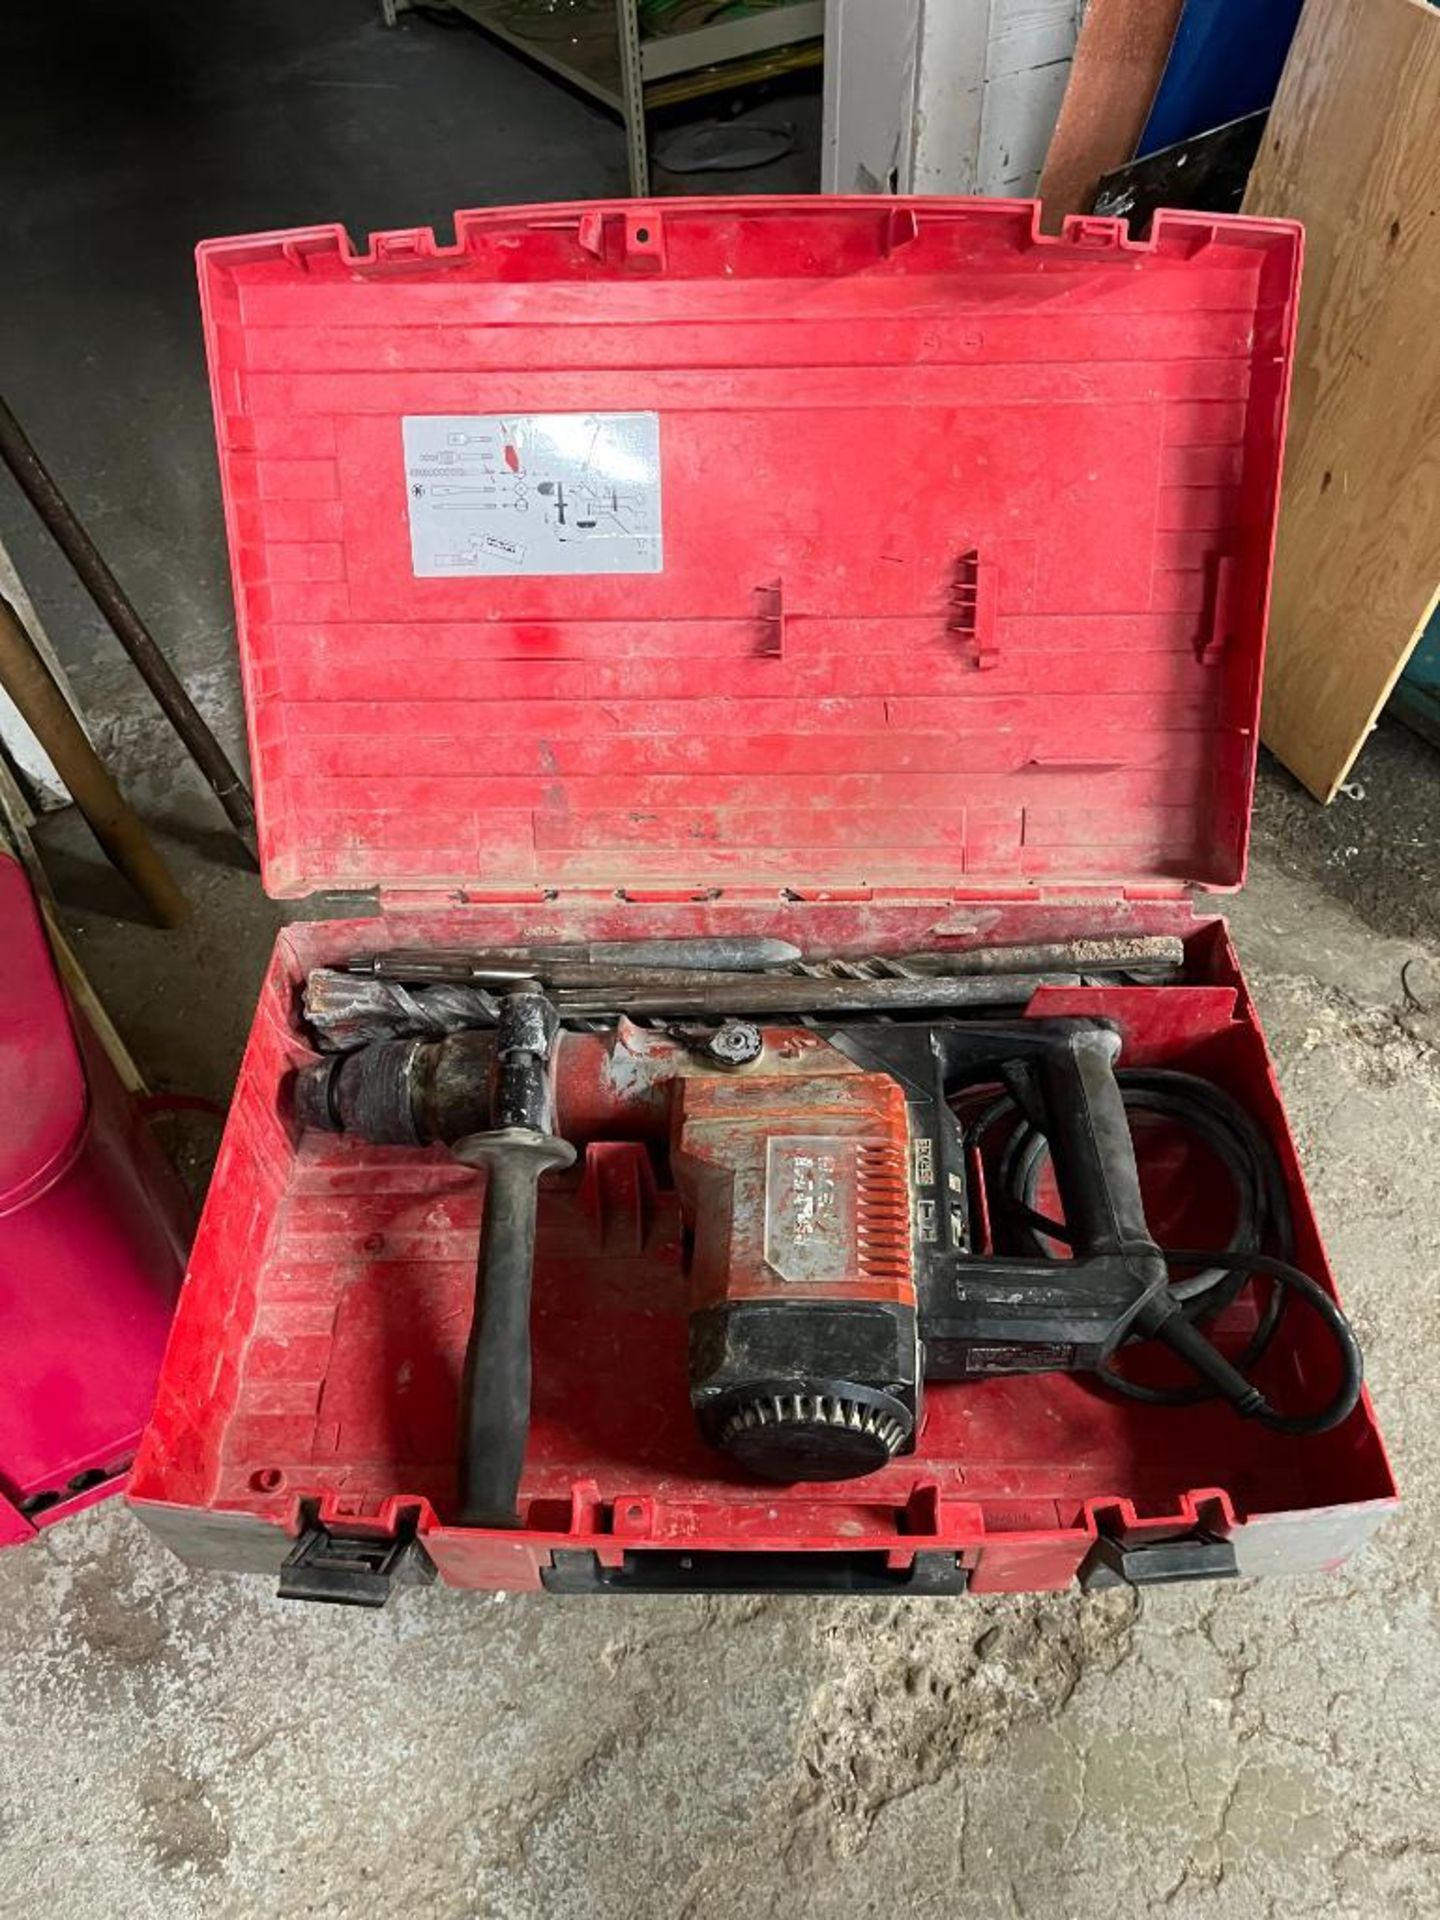 Shim stock, Torch, Hilti Bits, Green and Blue Tool Kits and Hilti Jack Hammer - Rigging Fee: $200 - Image 7 of 8